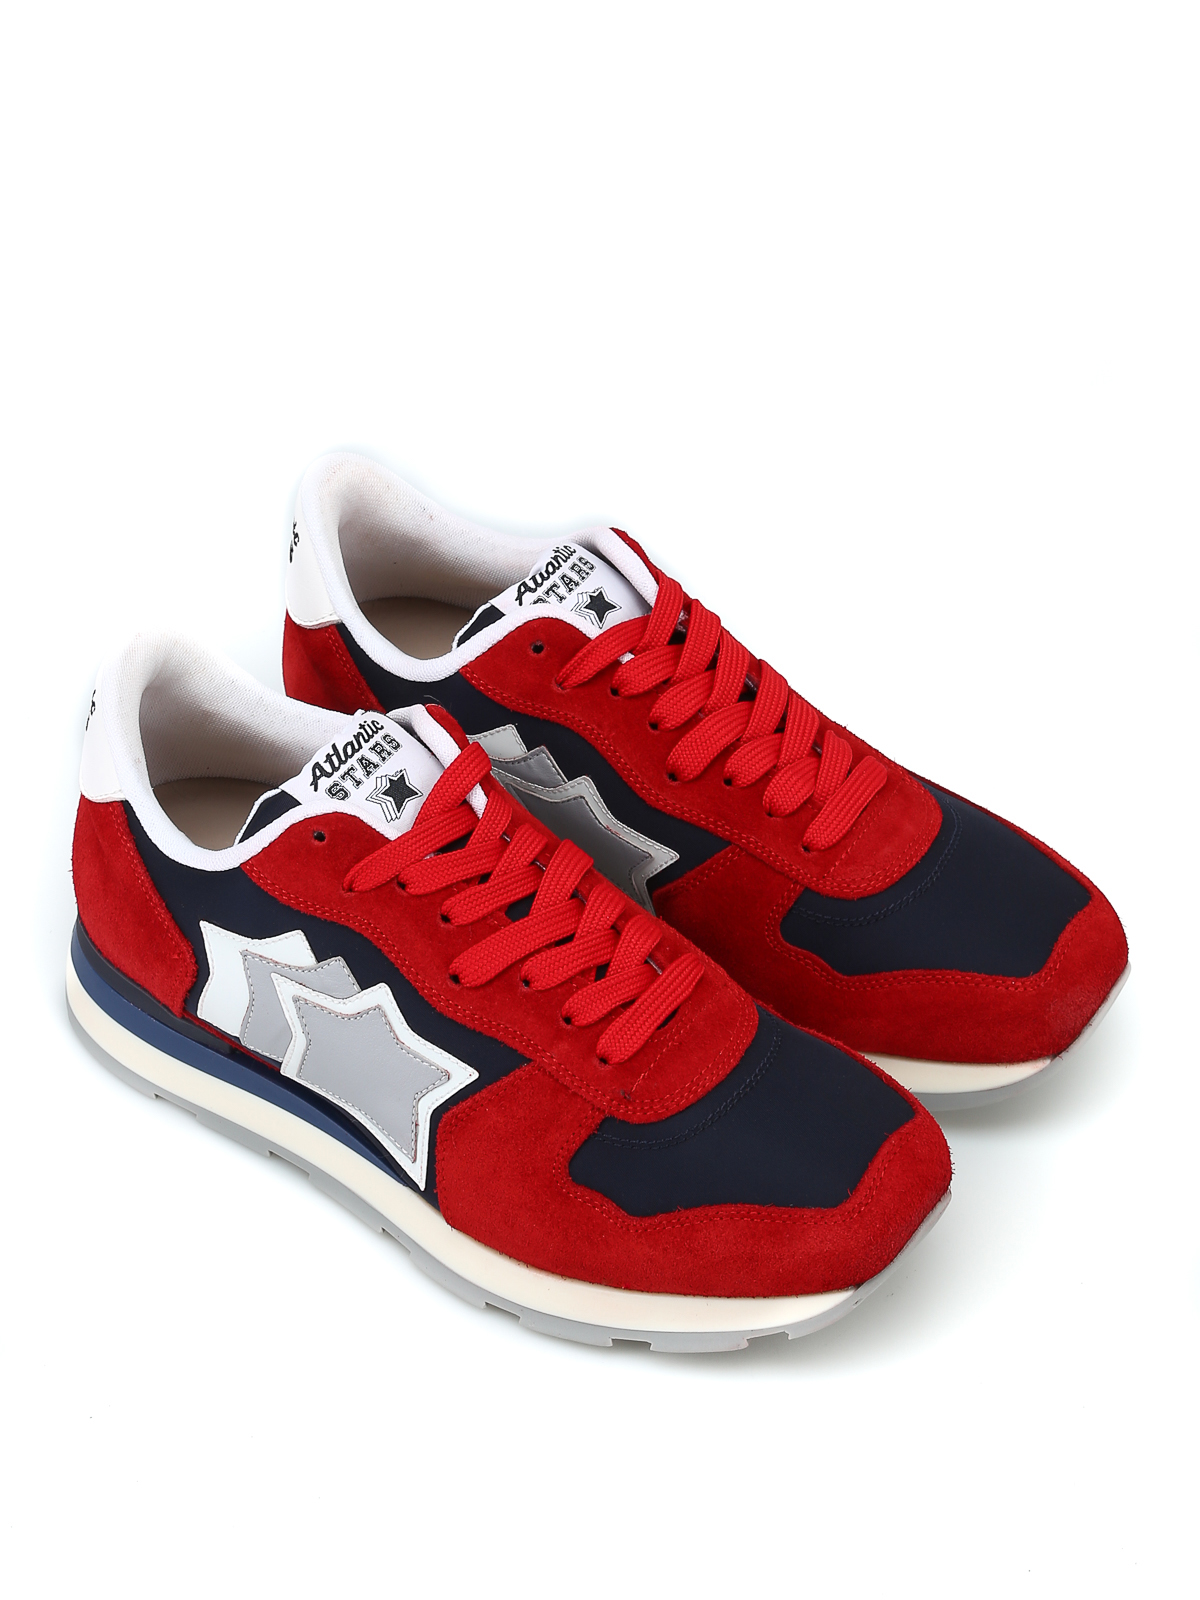 Atlantic Stars - Antares red and navy sneakers - trainers -  ANTARESNFS09NYE013